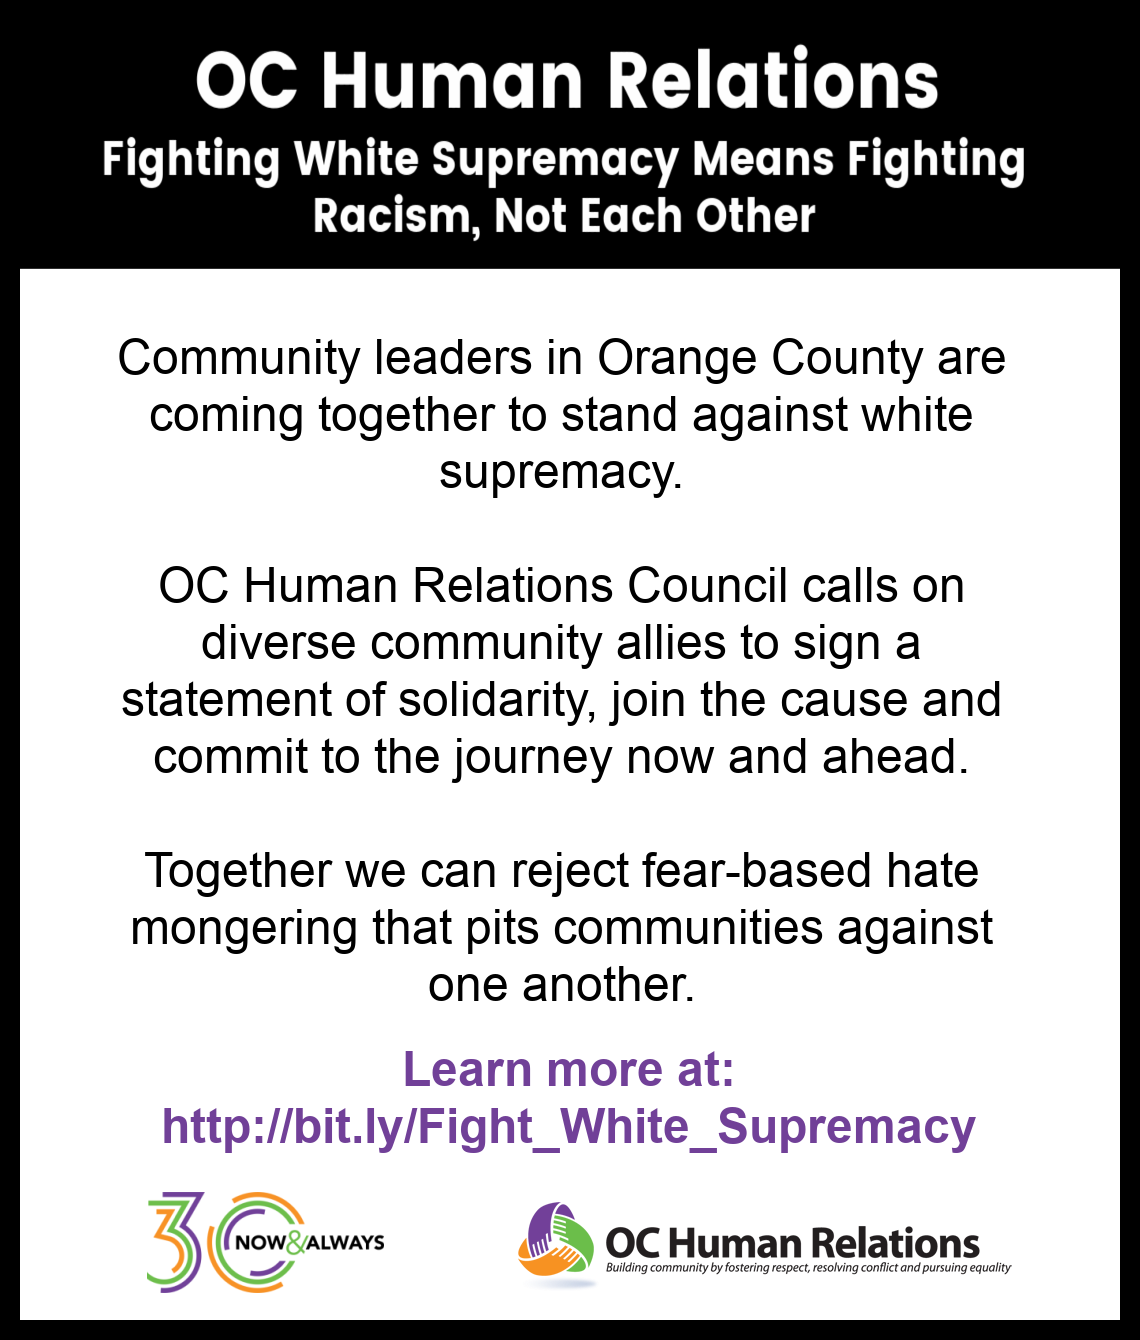 Fighting White Supremacy Means Fighting Racism, Not Each Other